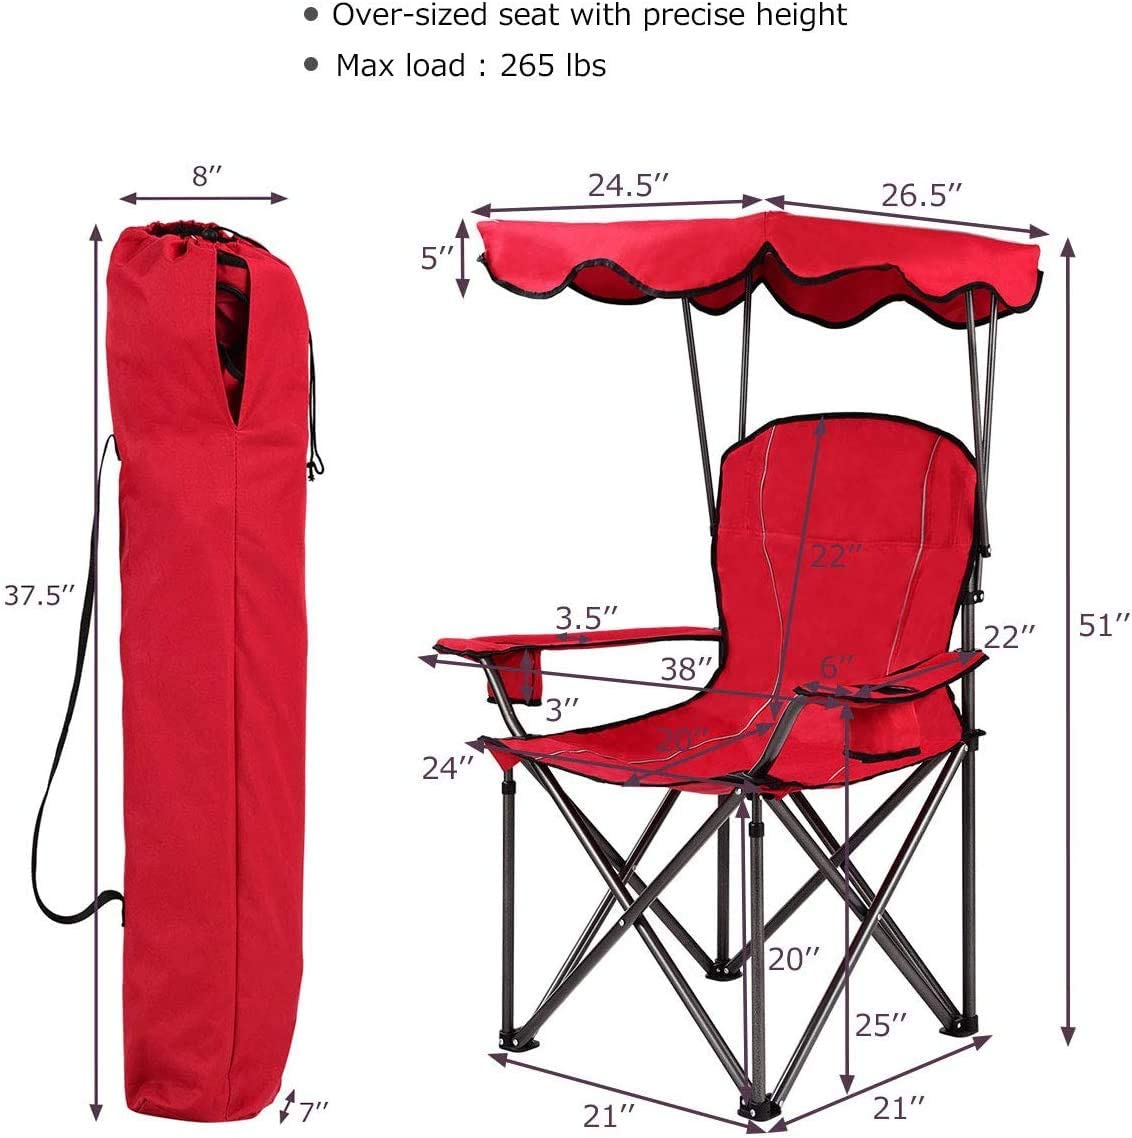 Beach Chair with Canopy Shade, Folding Lawn Chair with Umbrella Cup Holder & Carry Bag, Portable Sunshade Chair for Adults for Outdoor Travel Hiking Fishing, Red